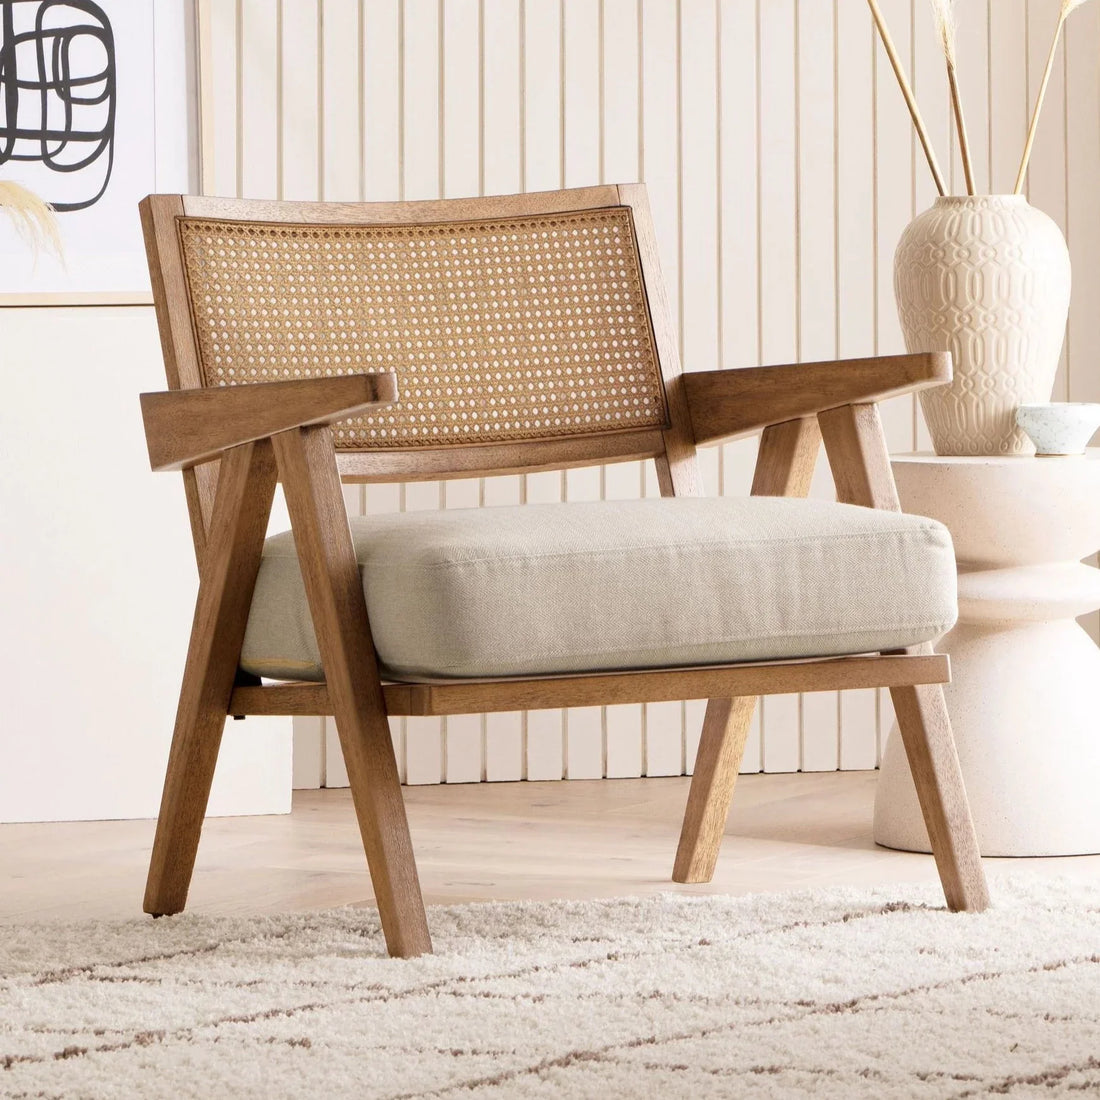 Why You Need a Modern Rustic Accent Chair in Your Home